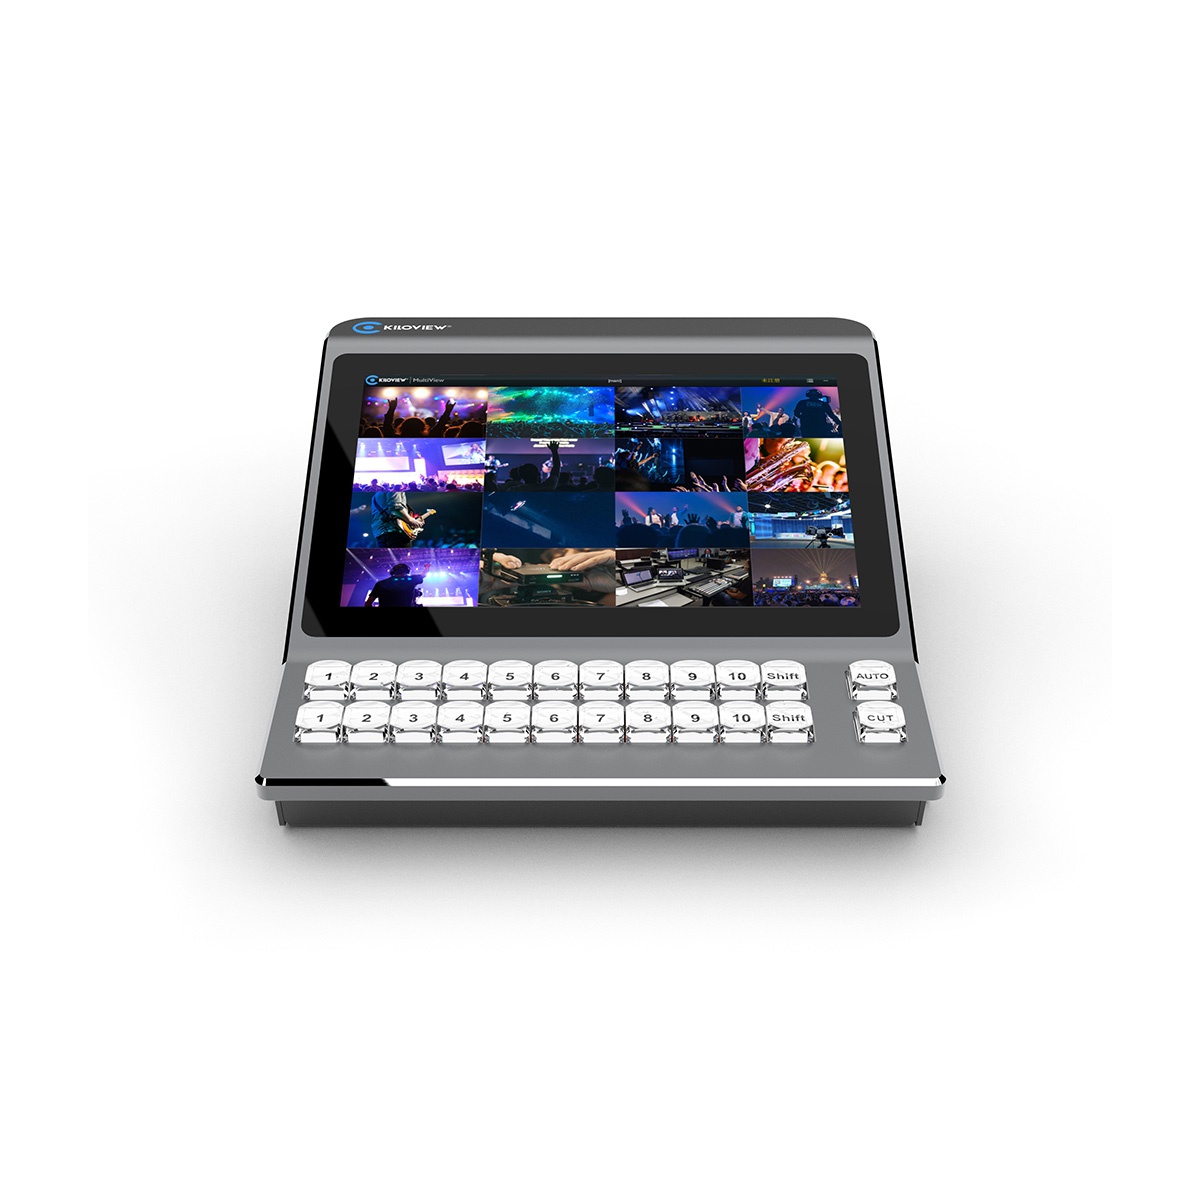 Kiloview Panel Deck - 10.1-inch touchscreen and a two-color LED 2x12 keybord